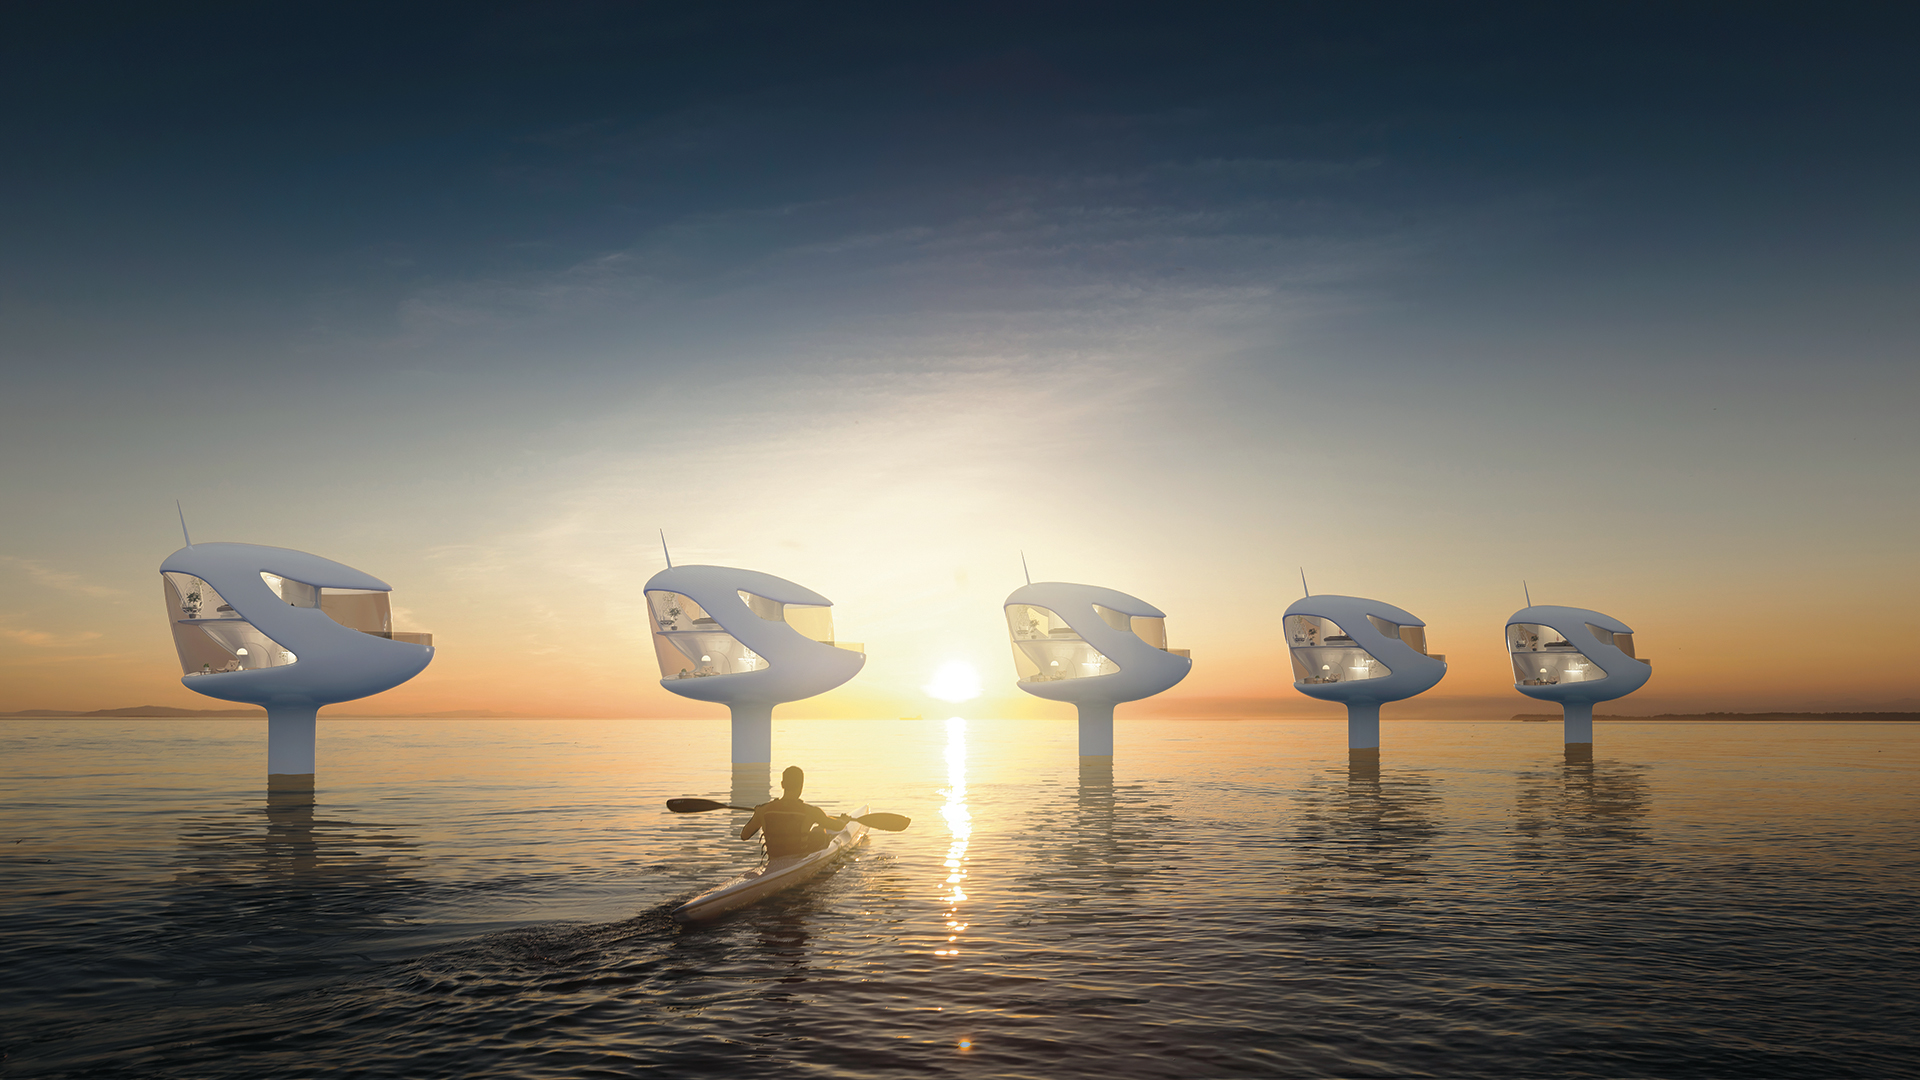 Seasteading floating homes are a possibility for a micronation